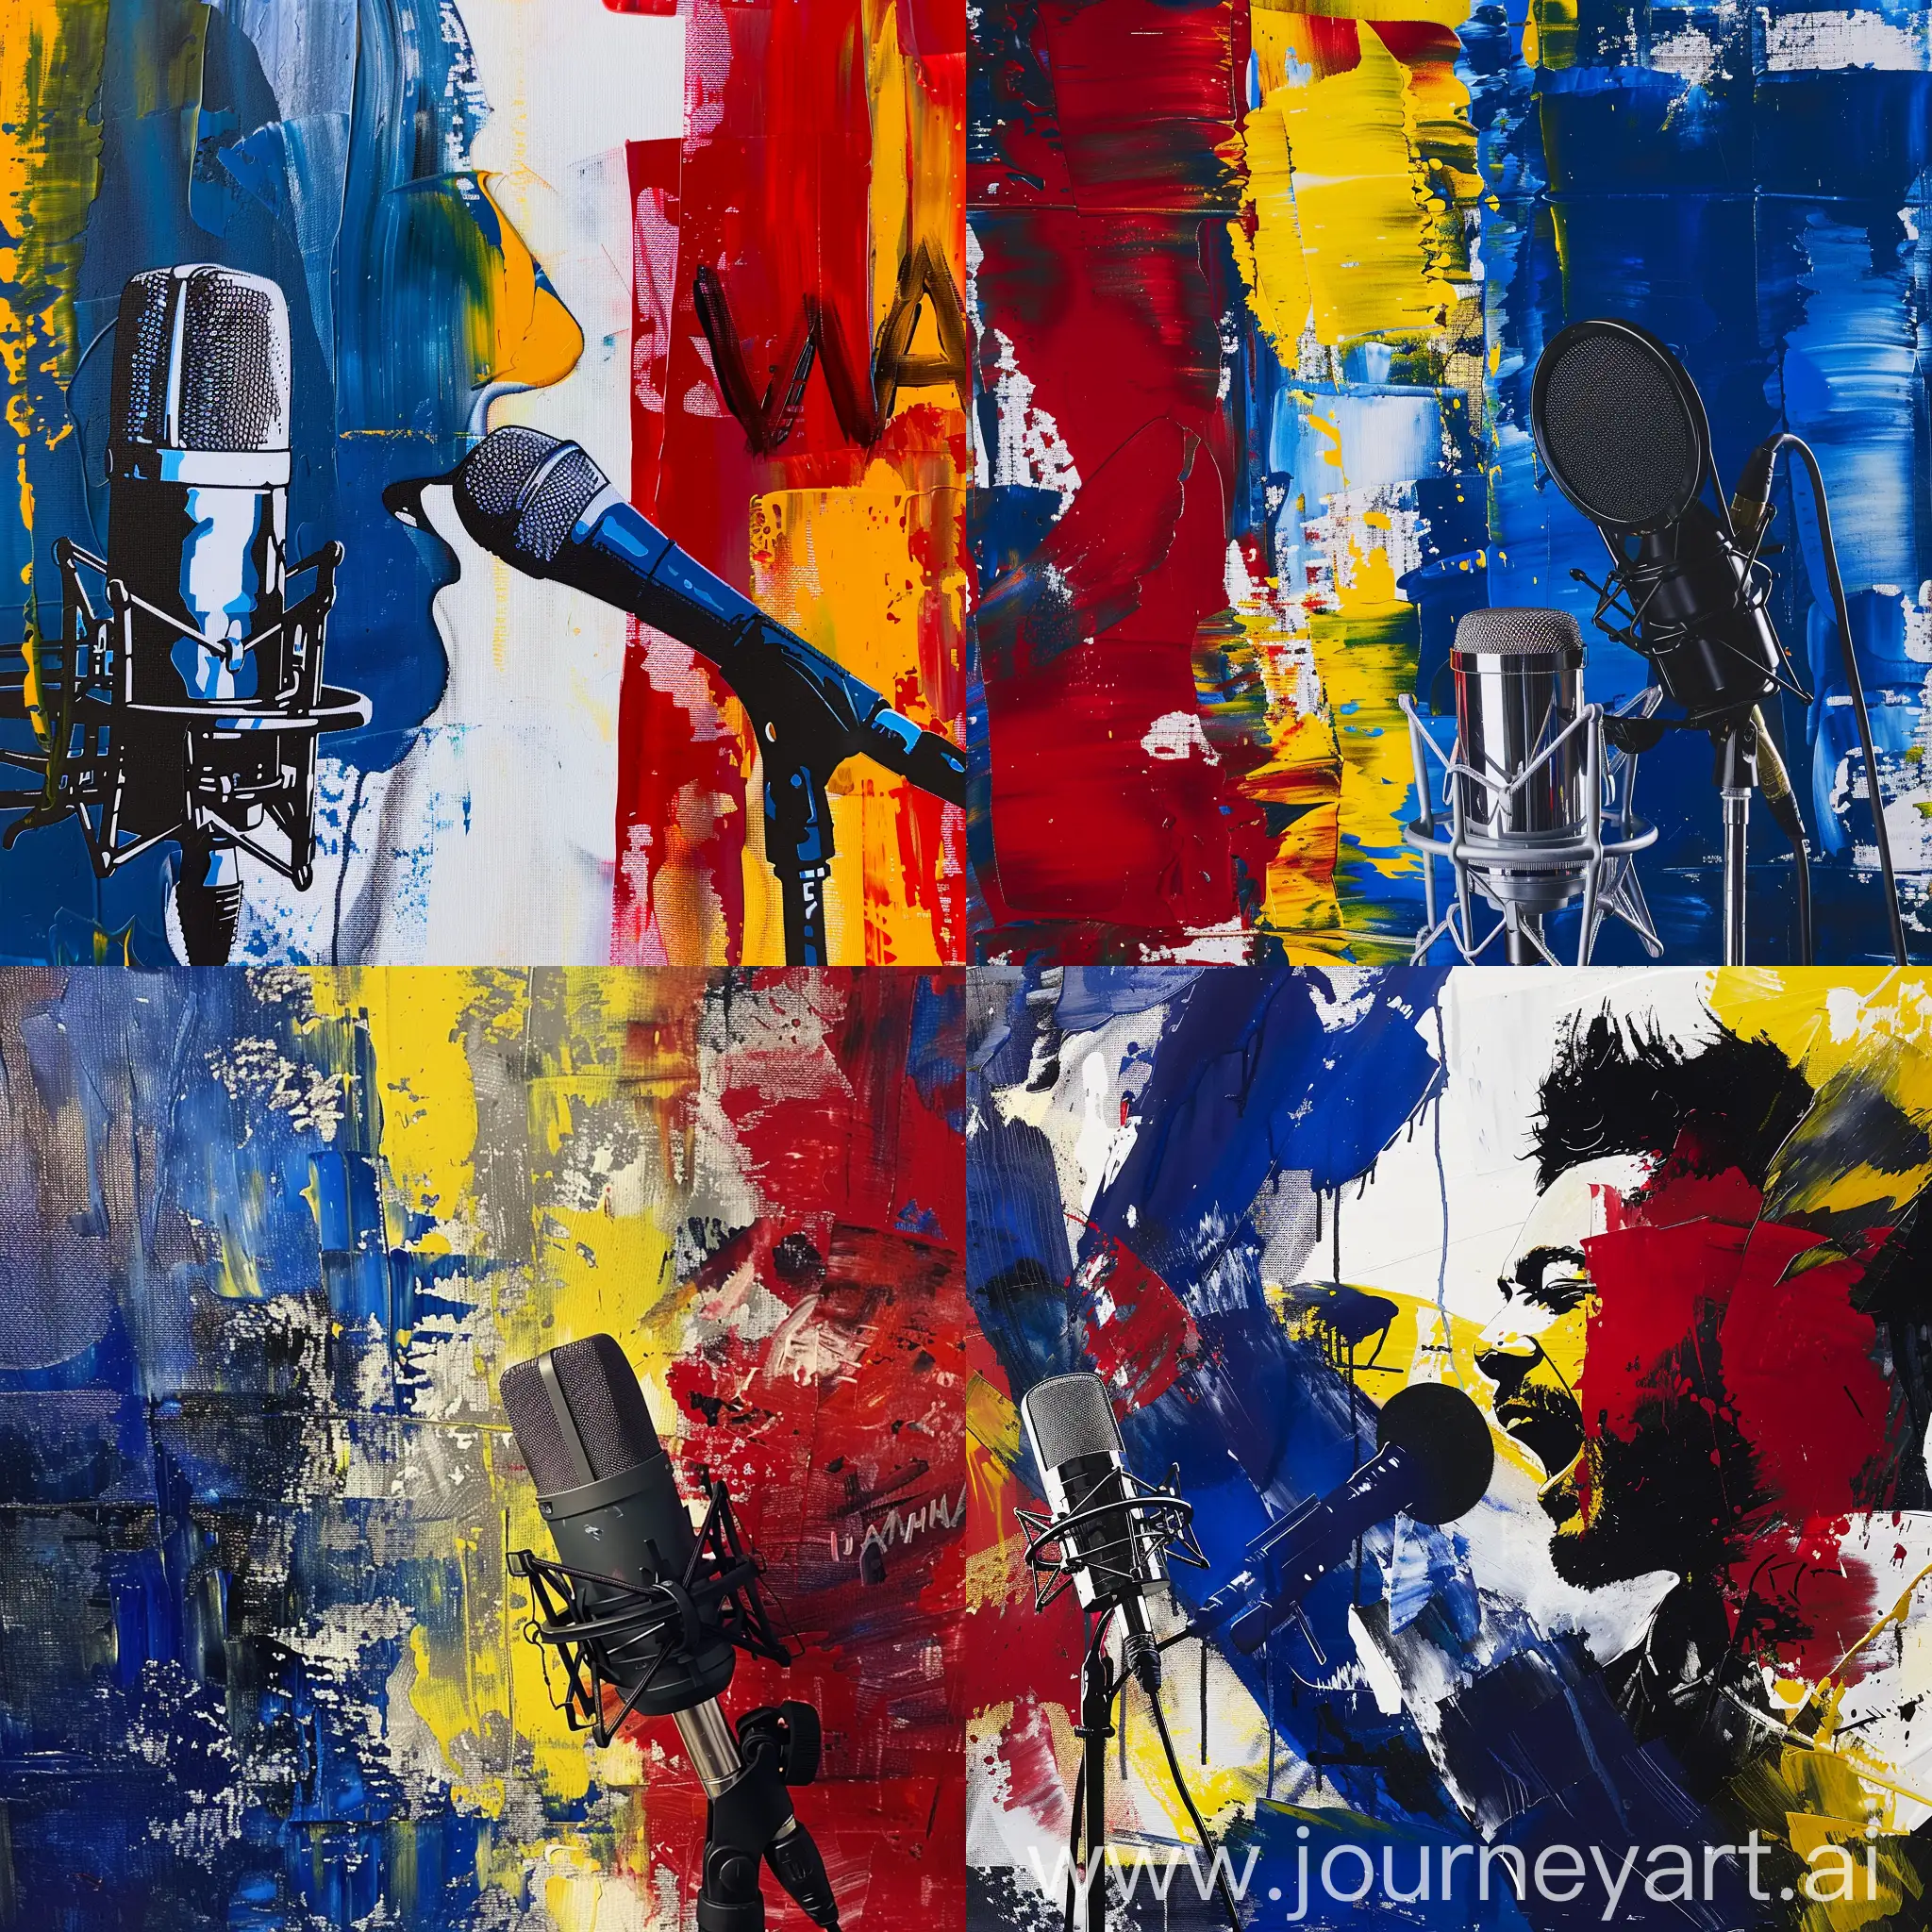 A modern painting with ultramarine, red and yellow. We see a close up from a male singer singing into a Neumann u87 microfoon 